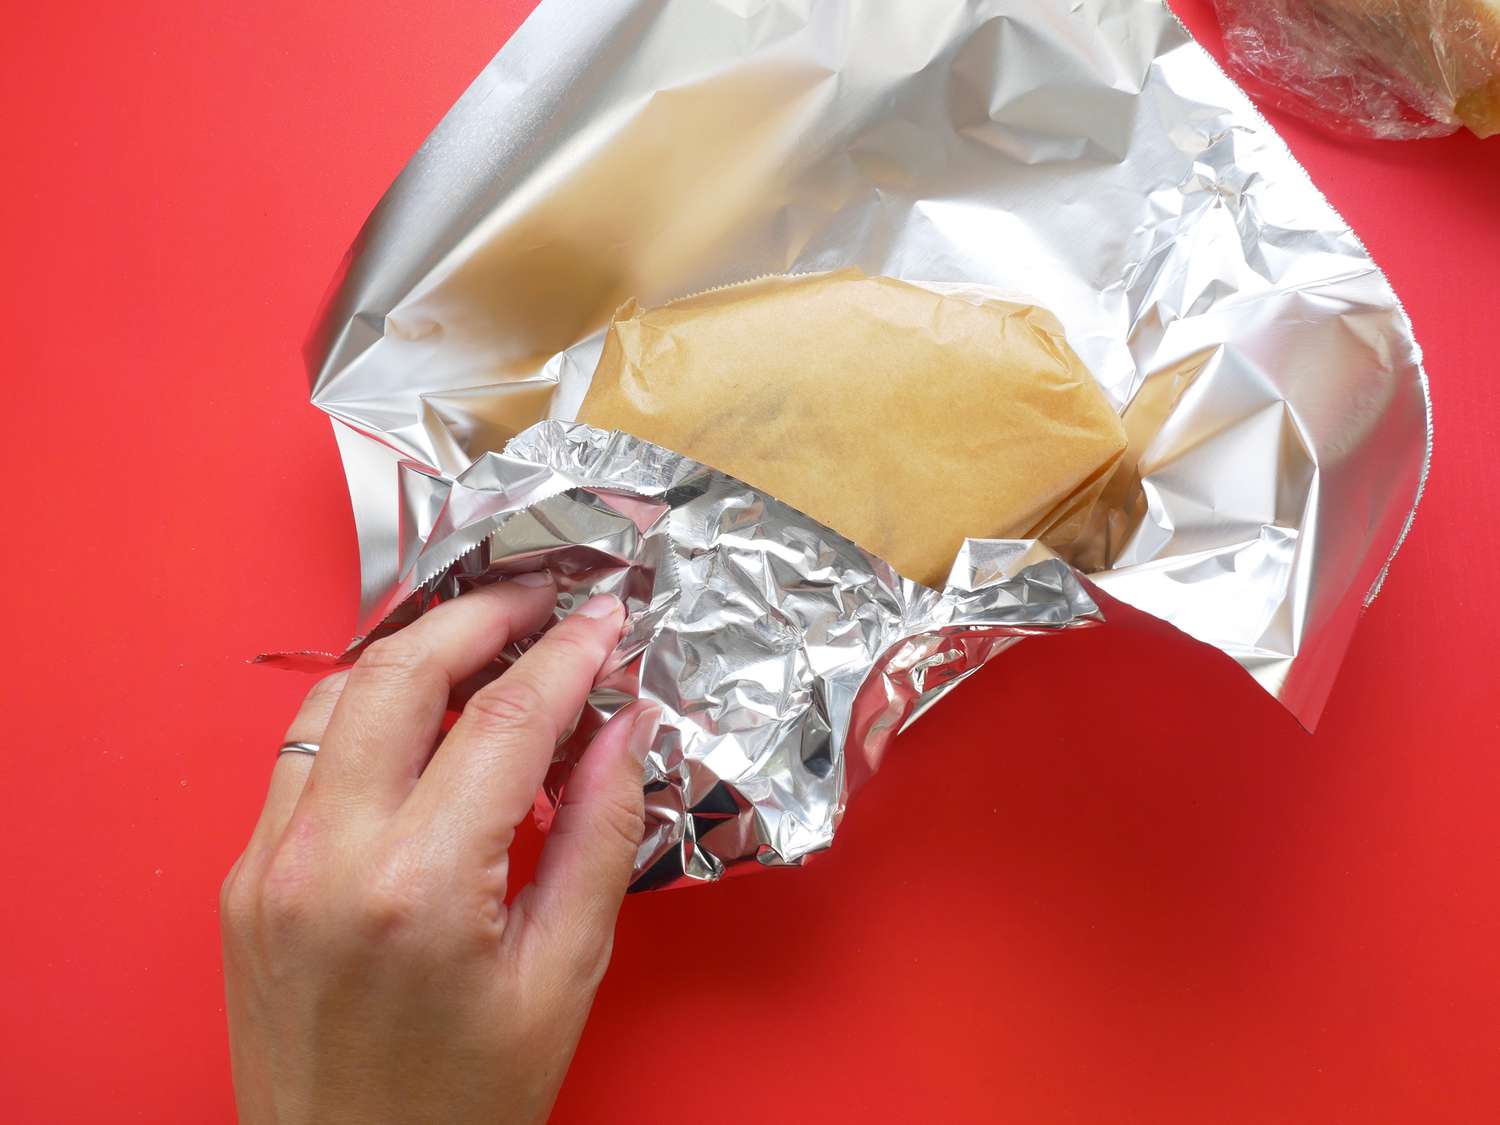 wrapping cheese in parchment paper and aluminum foil